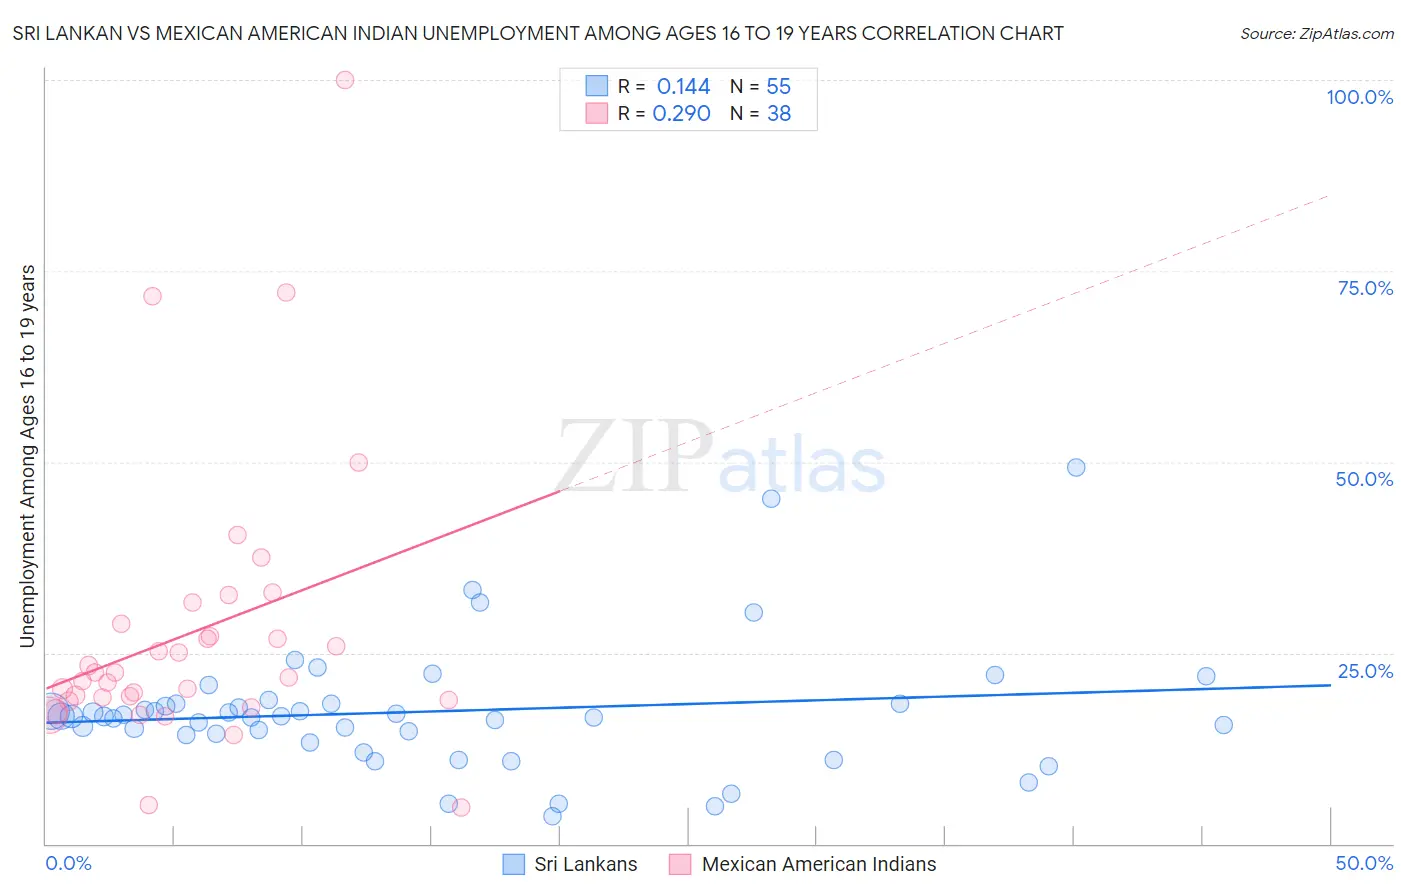 Sri Lankan vs Mexican American Indian Unemployment Among Ages 16 to 19 years